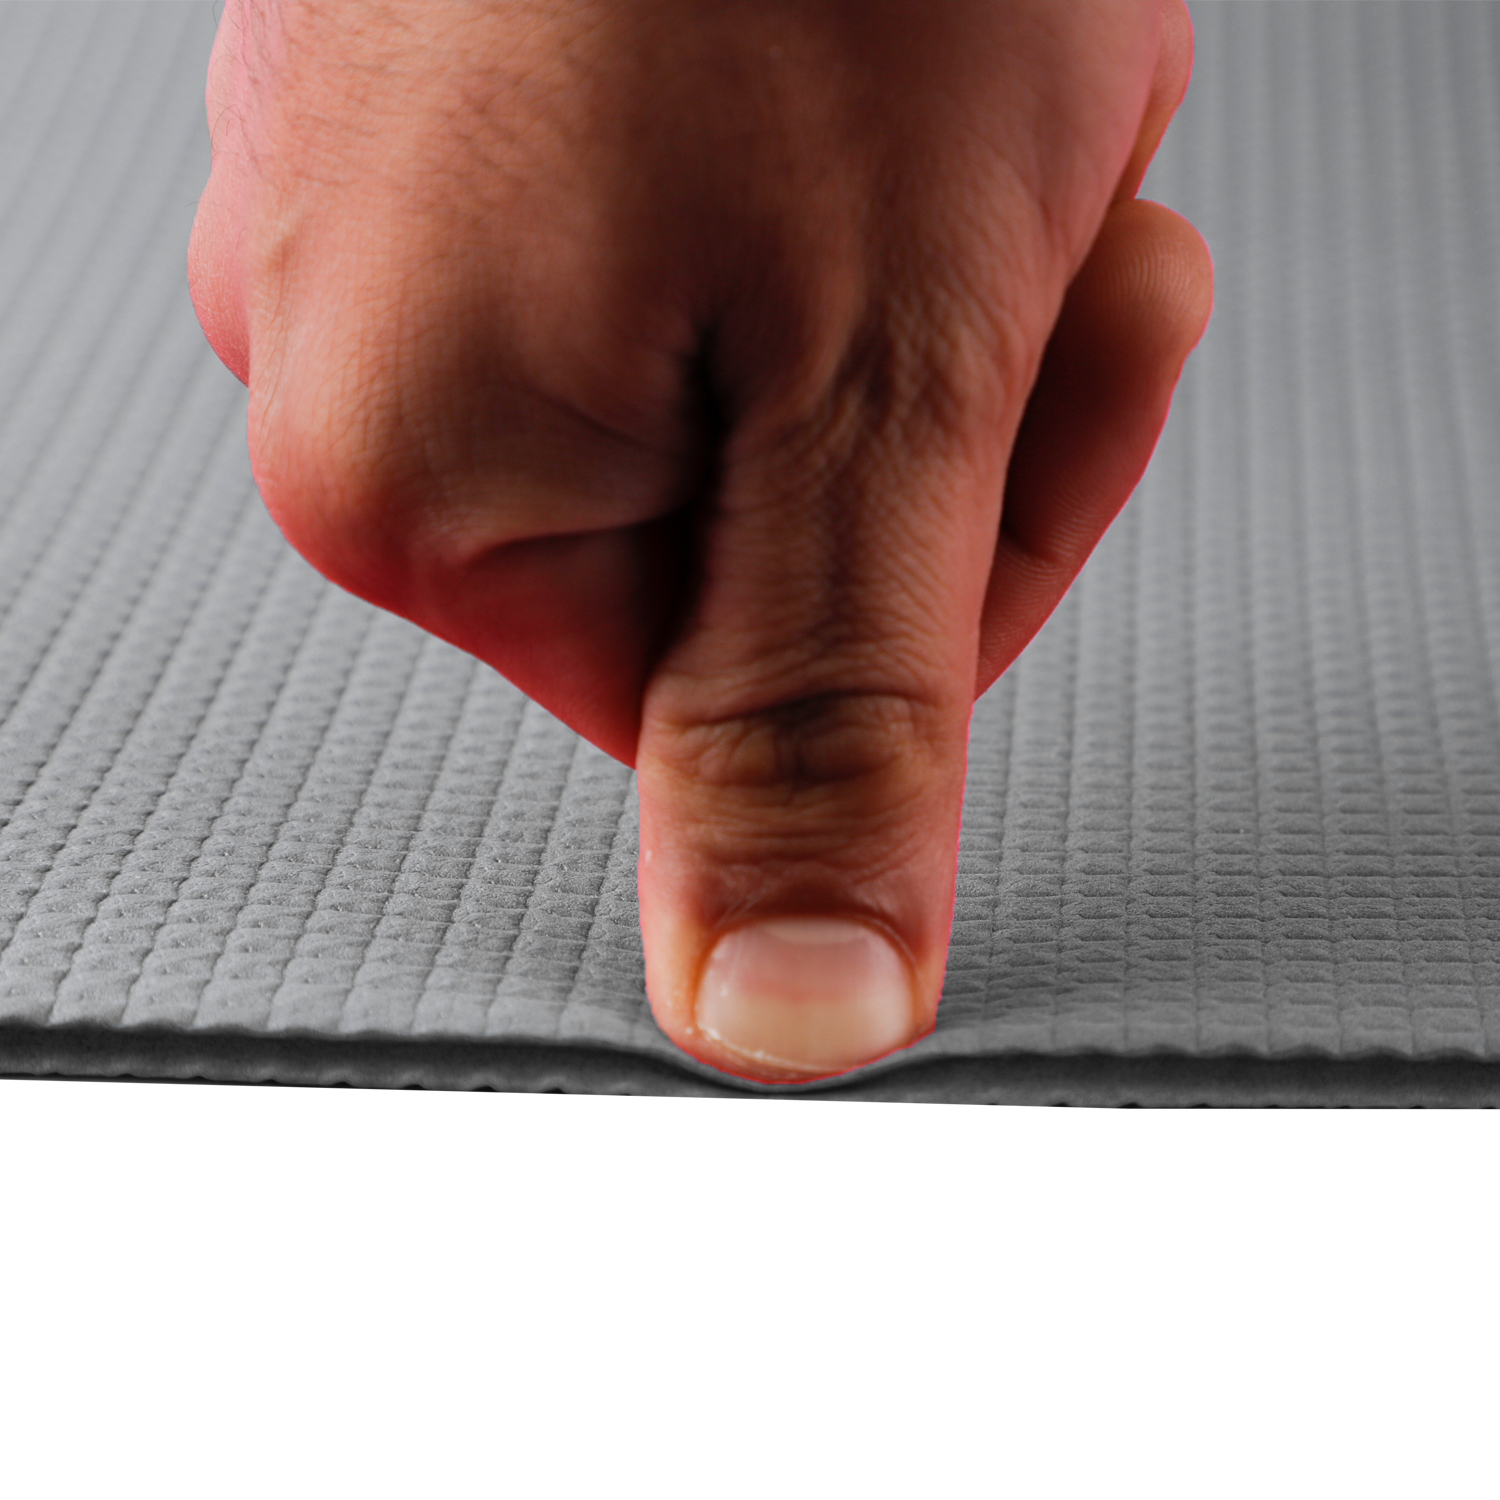 Steelbird Yoga Mat For Men And Women 6 X 2 Feet Wide Extra Thick Exercise Mat For Workout,Yoga,Fitness,Gym, Pilates And High-Density Anti-Tear Non-Slip Light Weight Mat (6mm Thickness)